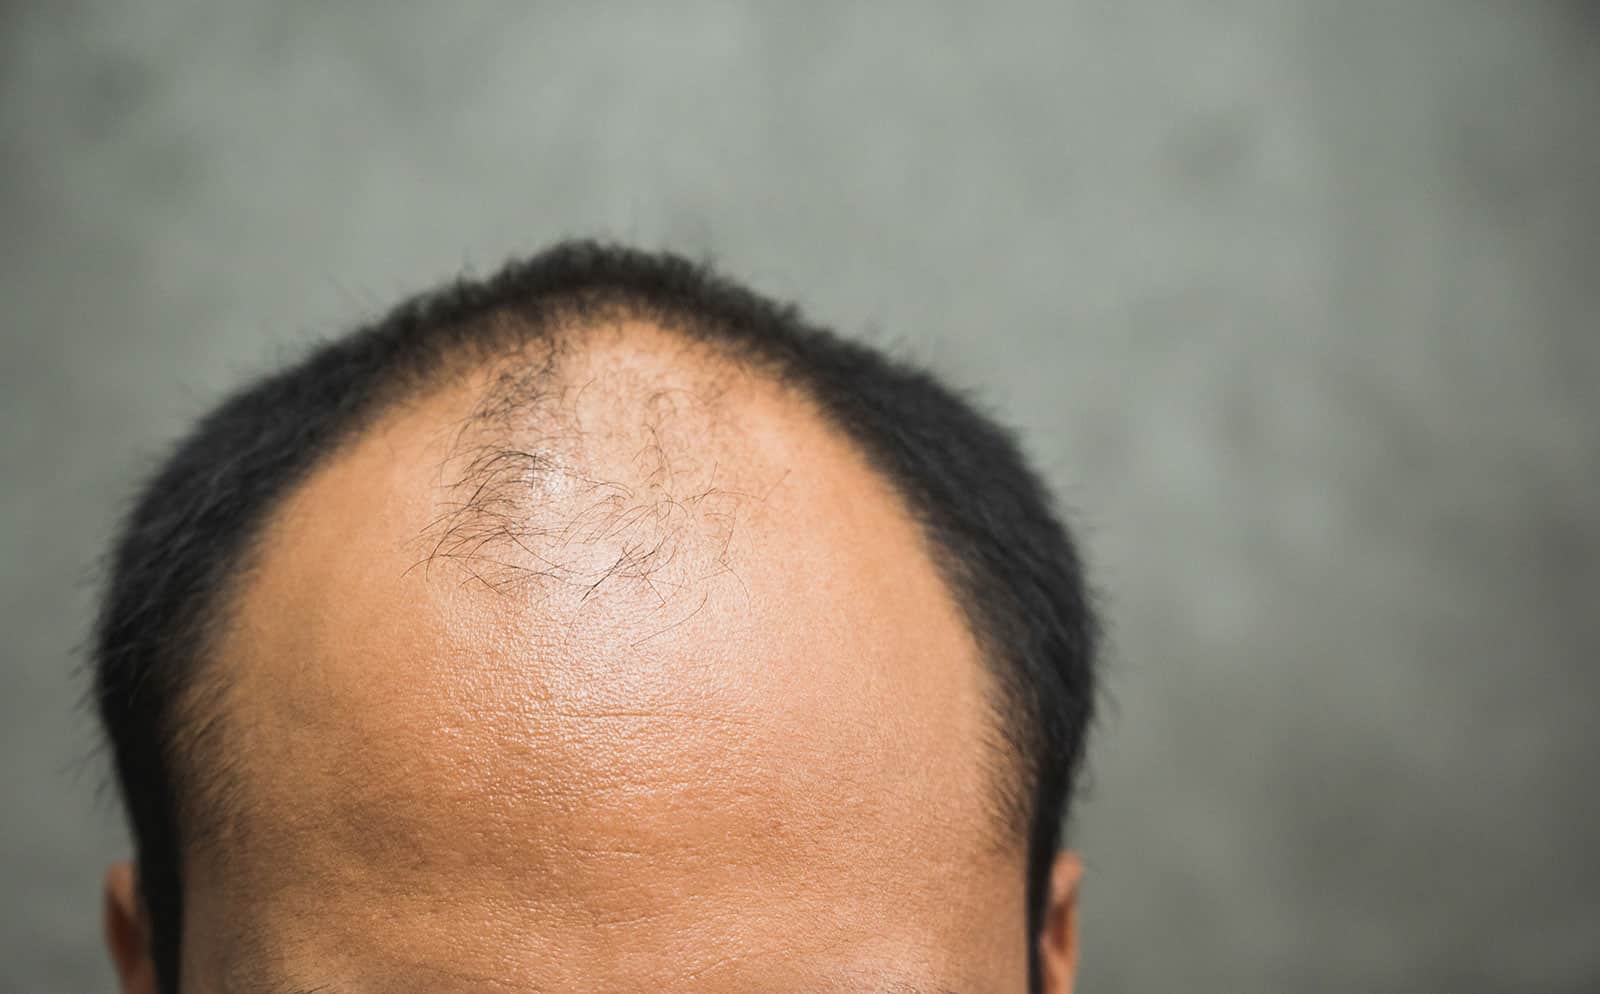 Are You Wondering Why Hair Transplant Procedure Is Expensive? Don’t Wonder Anymore With These 7 Reasons